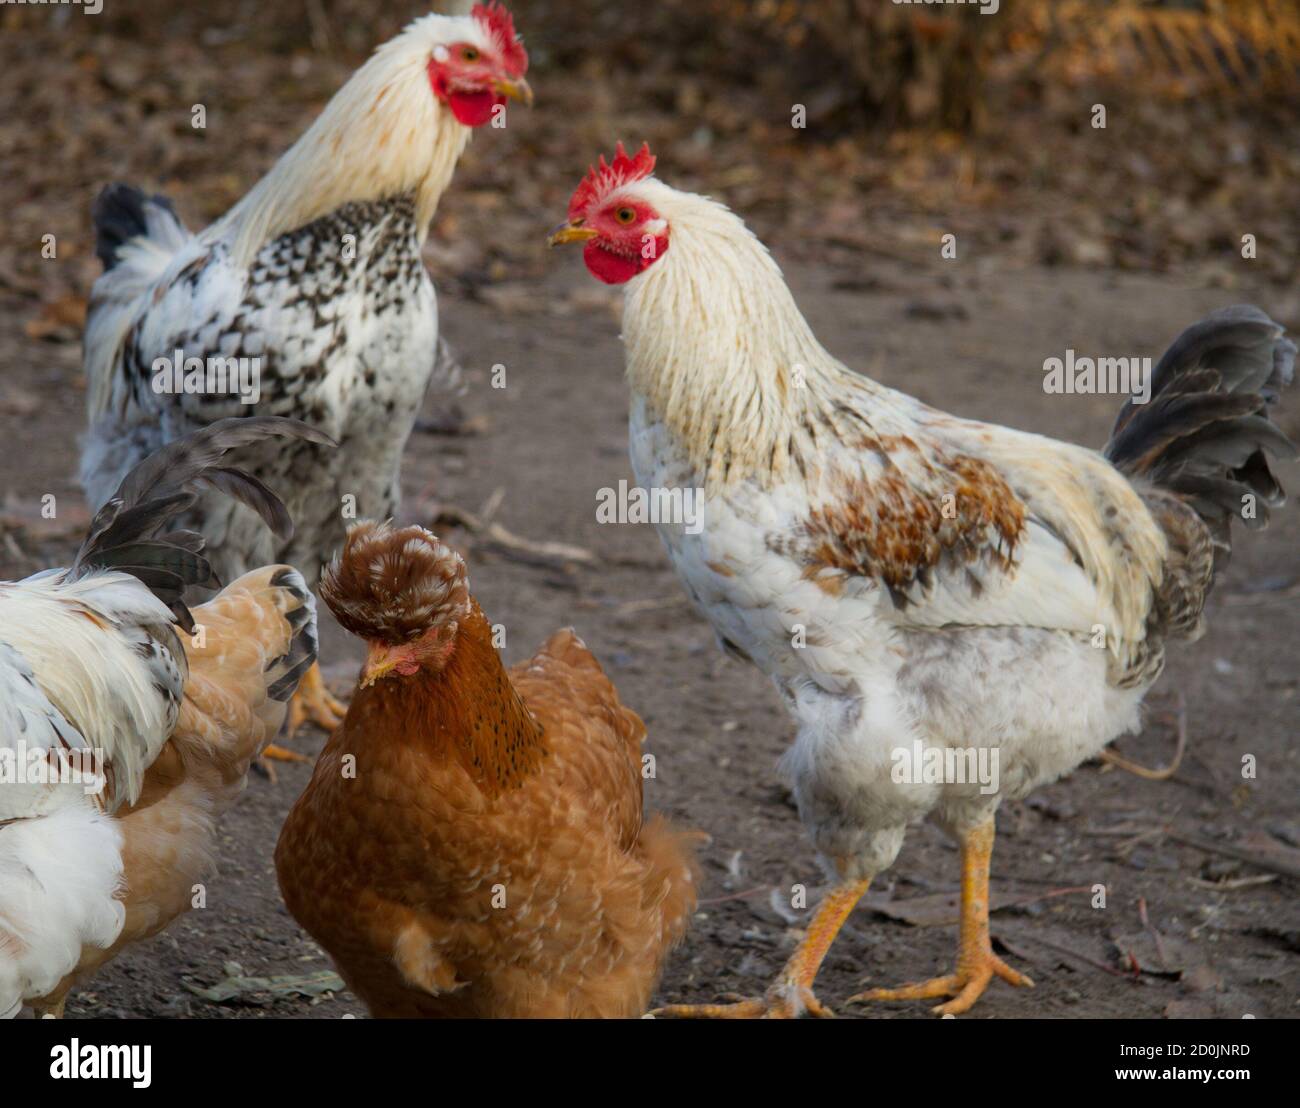 Group of hens Stock Photo - Alamy